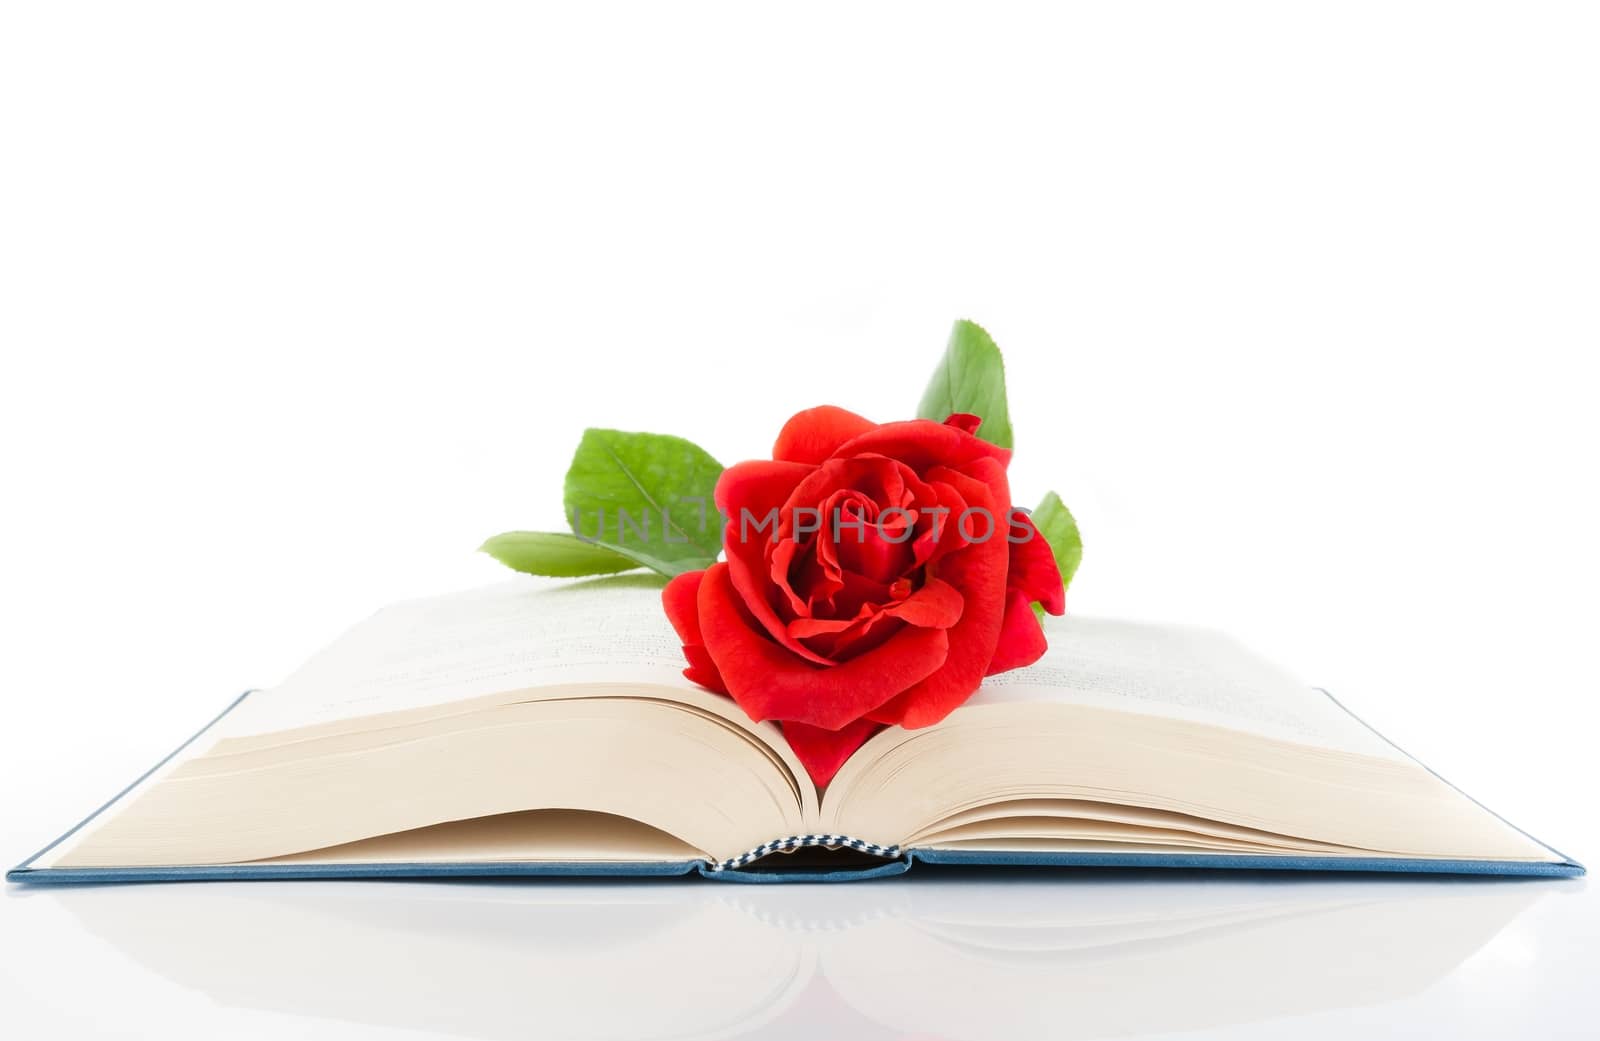 red rose on the open book on white background by donfiore